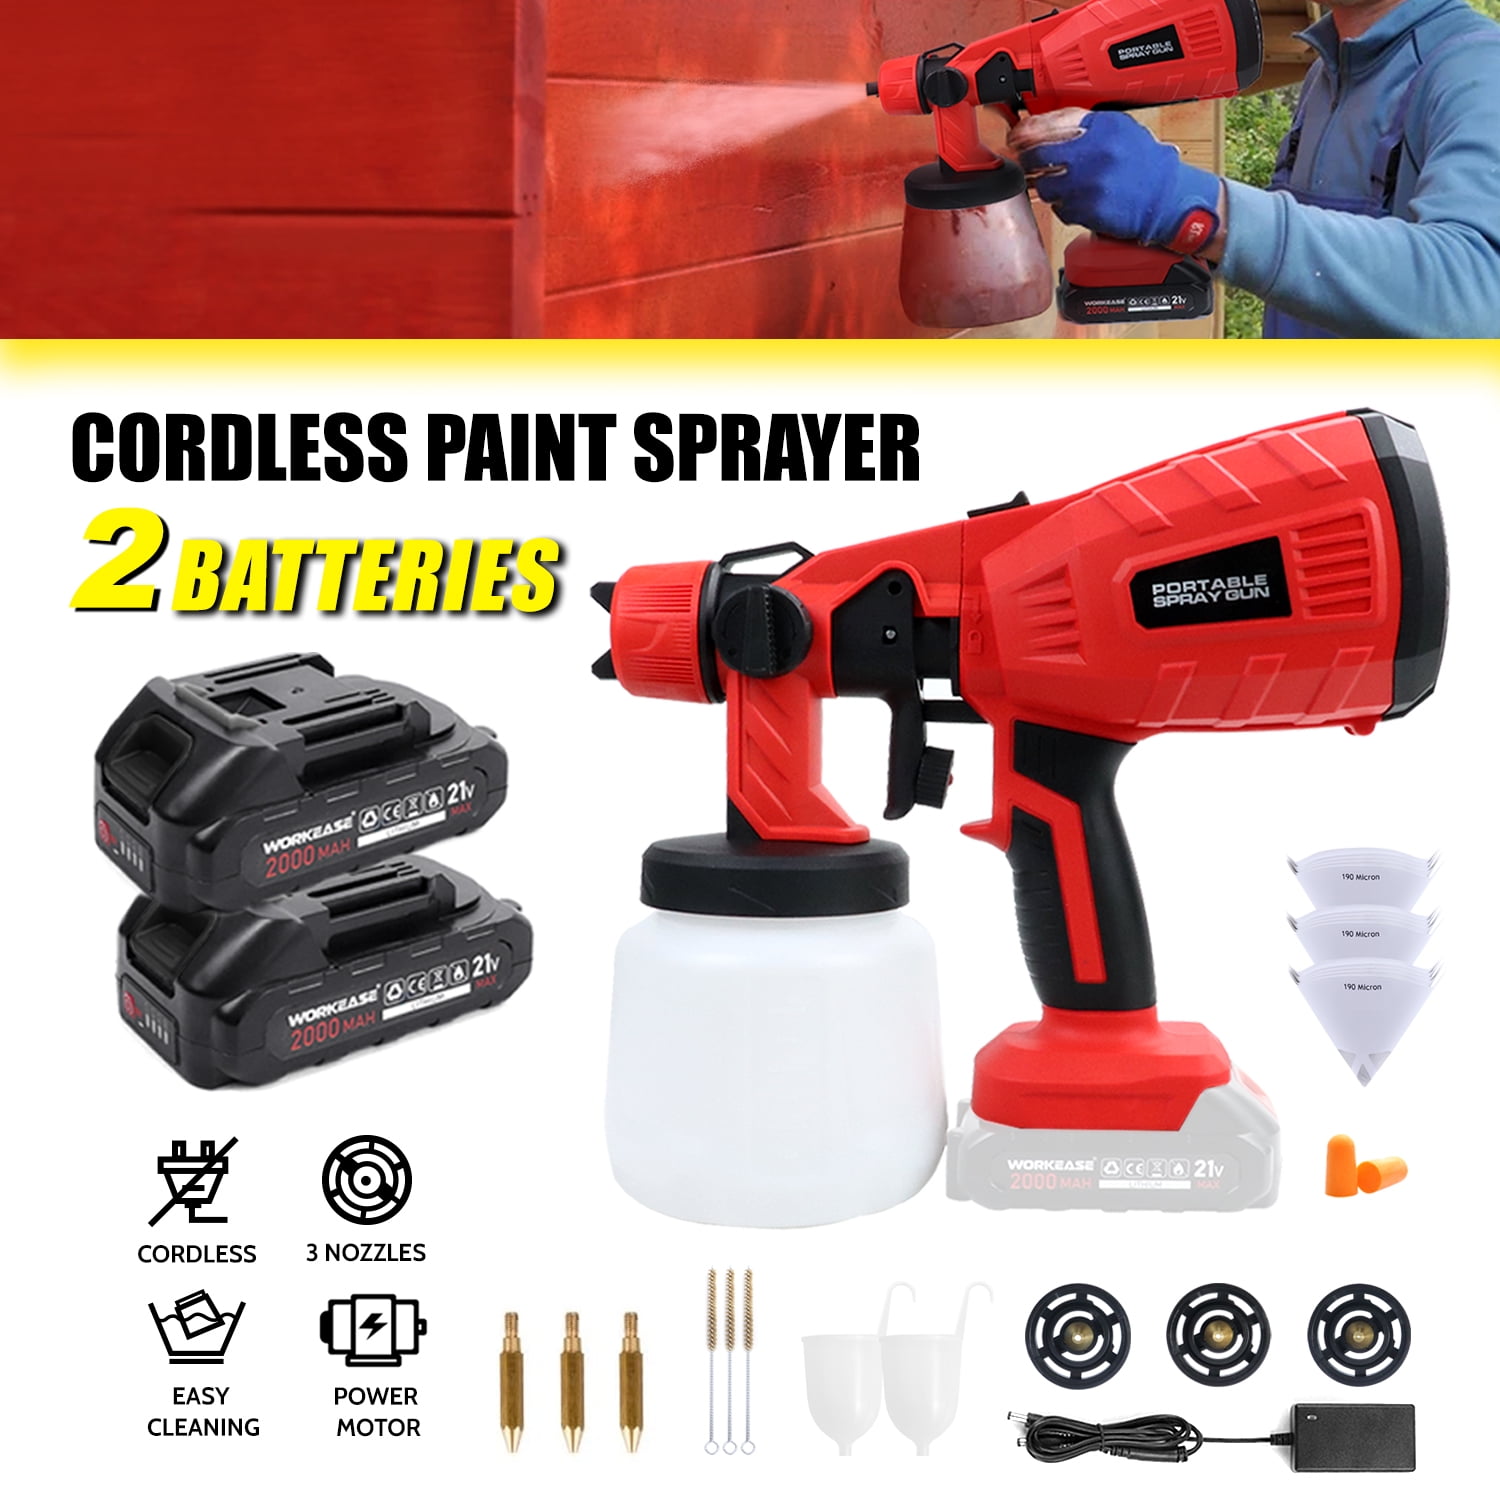 CANBRAKE Cordless Paint Sprayer, 21V HVLP Electric Spray Paint Gun with 2 x  4.0Ah Batteries 6 Copper Nozzles & 1000ml Container, Home